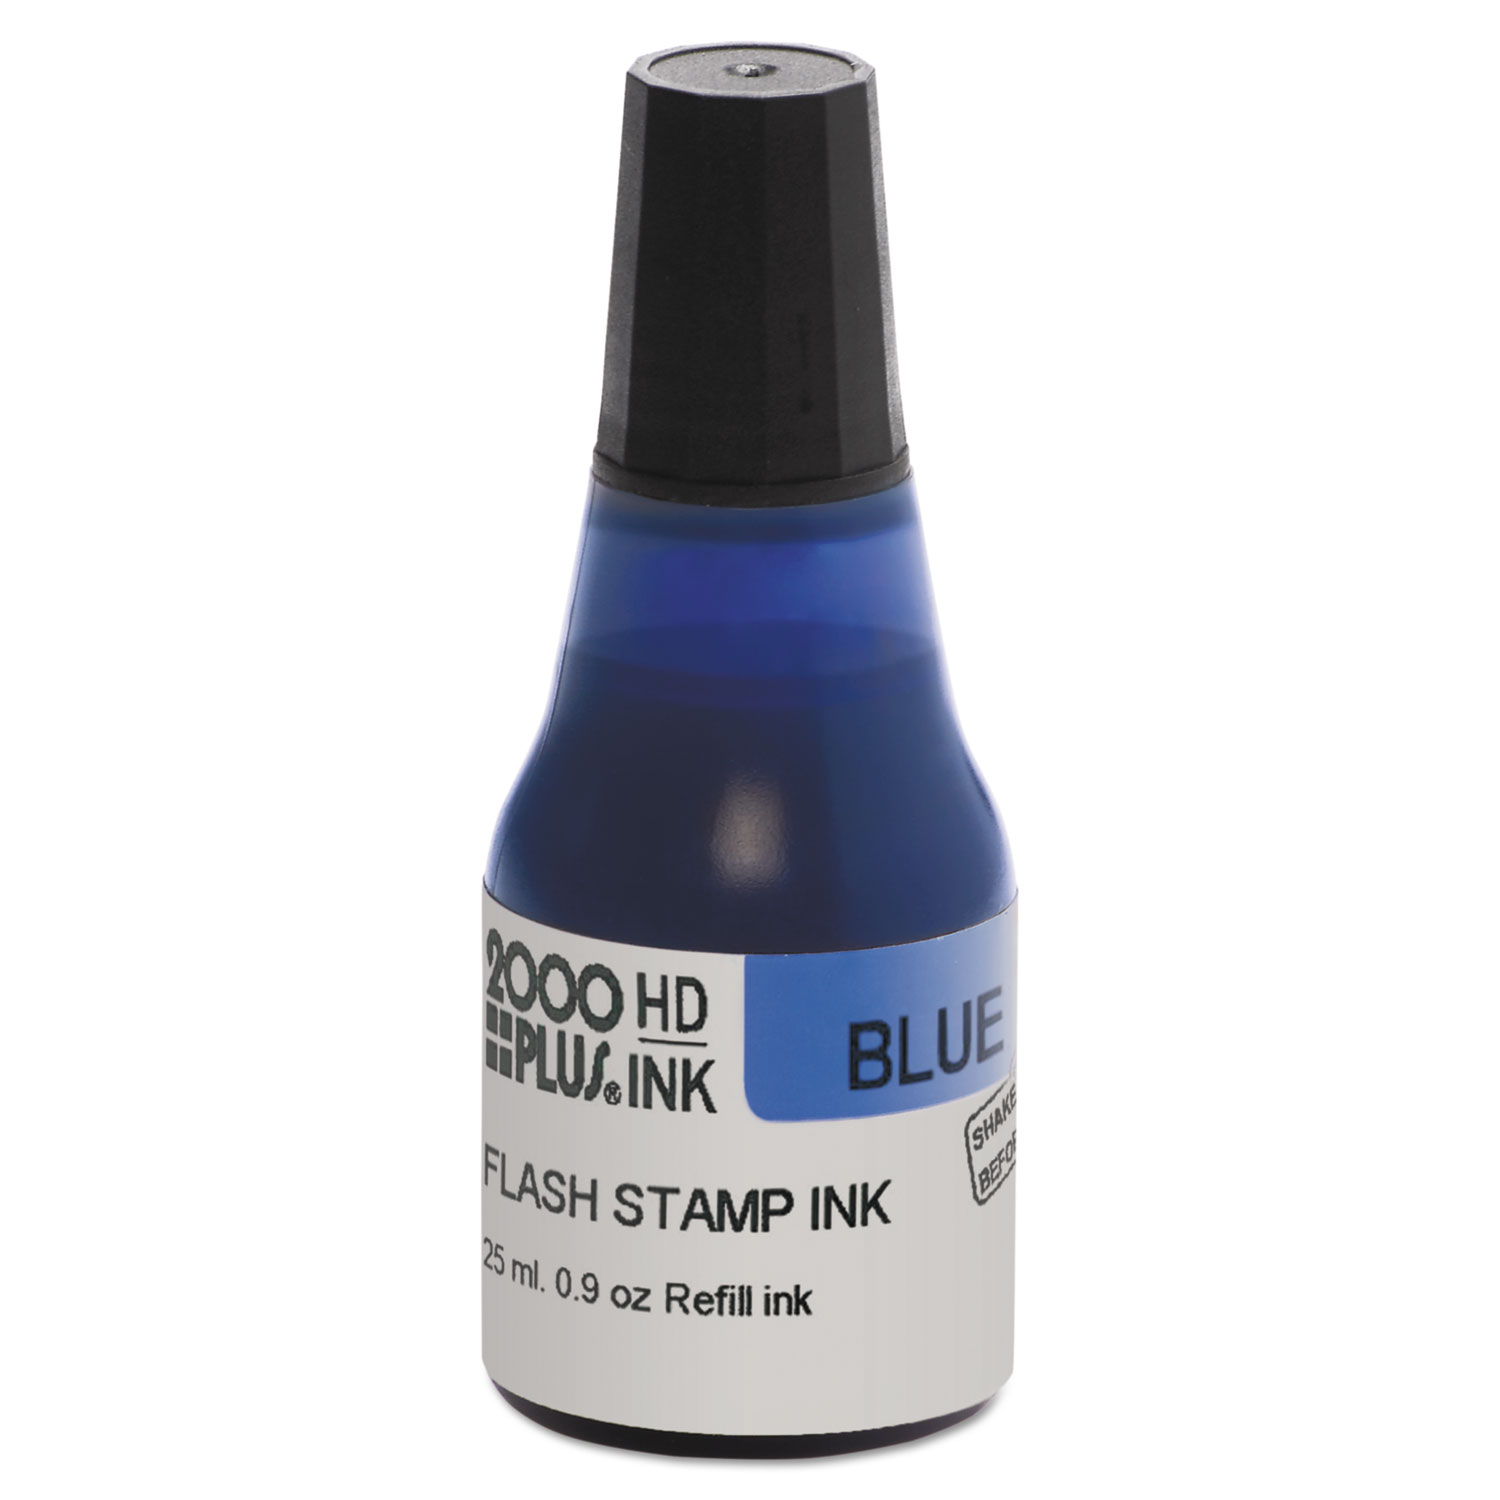  COSCO 2000PLUS 033959 Pre-Ink High Definition Refill Ink, Blue, 0.9 oz. Bottle (COS033959) 